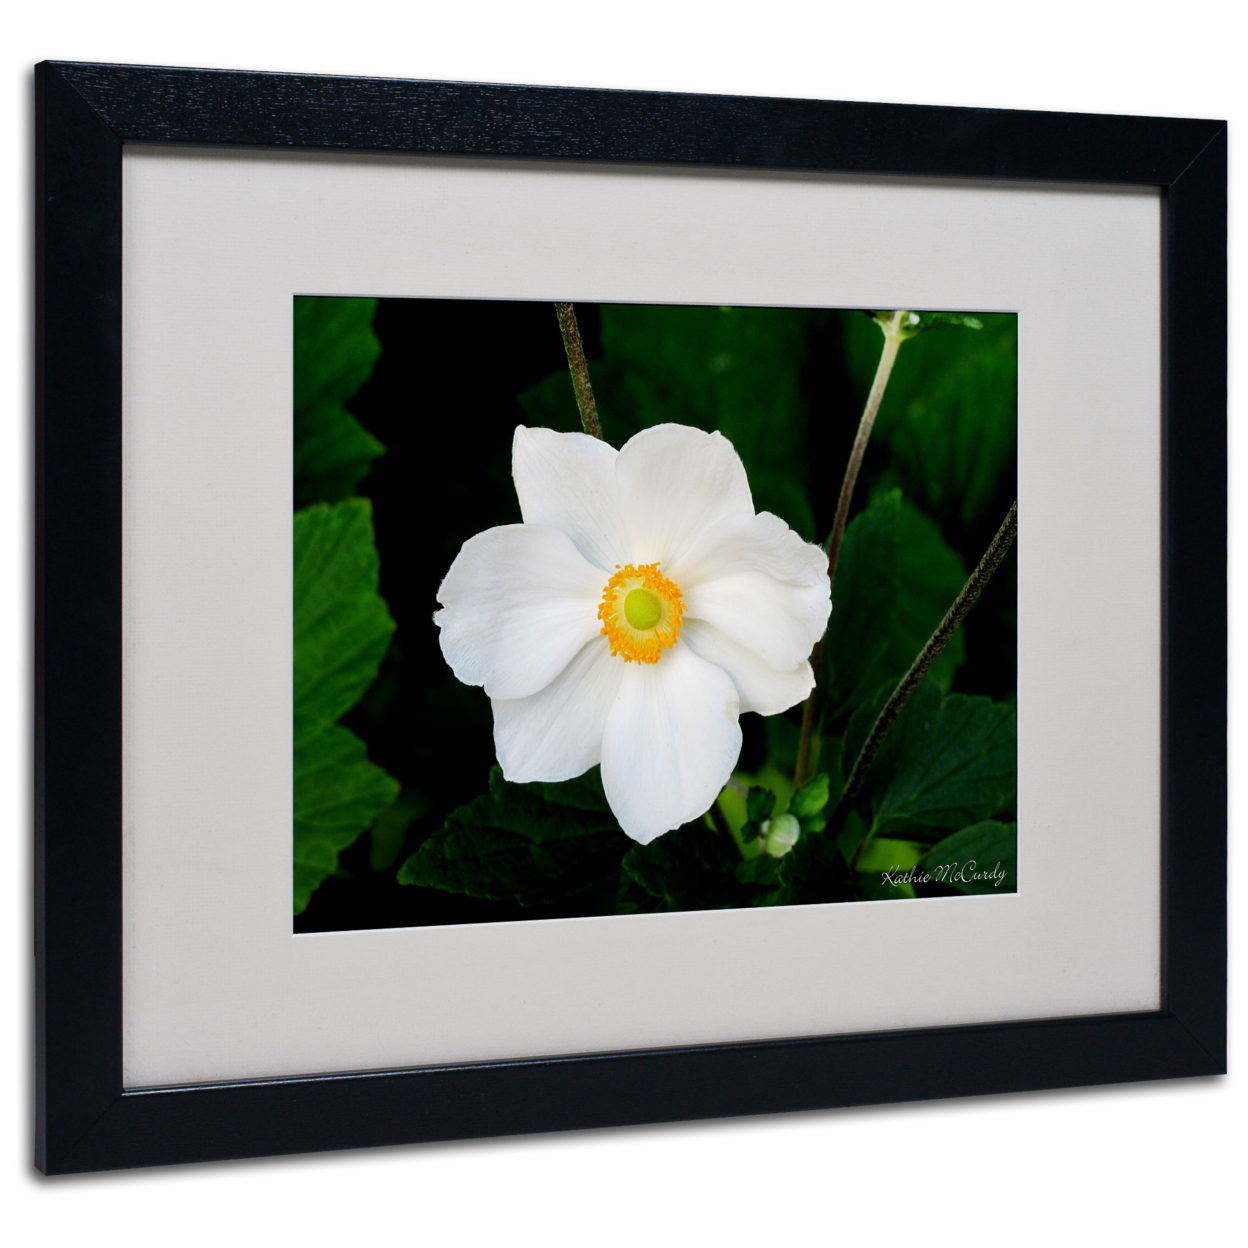 Kathie McCurdy 'Big White Flower' Black Wooden Framed Art 18 X 22 Inches